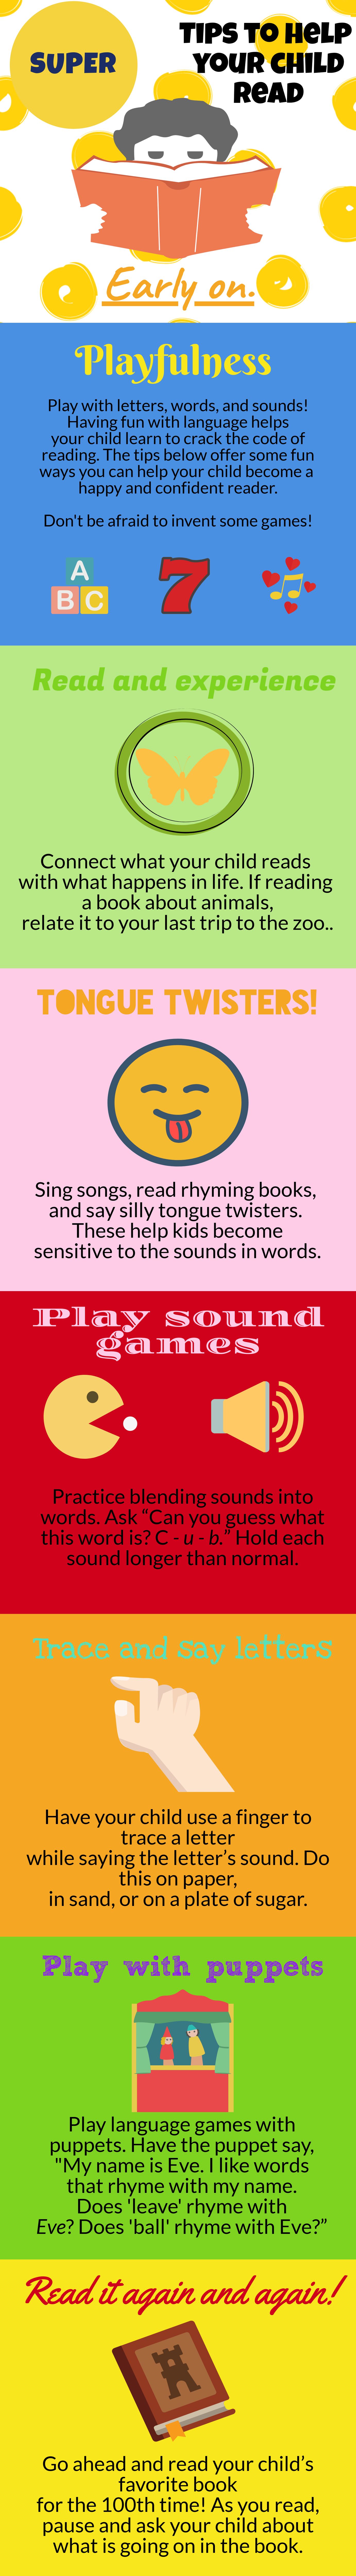 Reading Tips for Children | How to help my child read better?